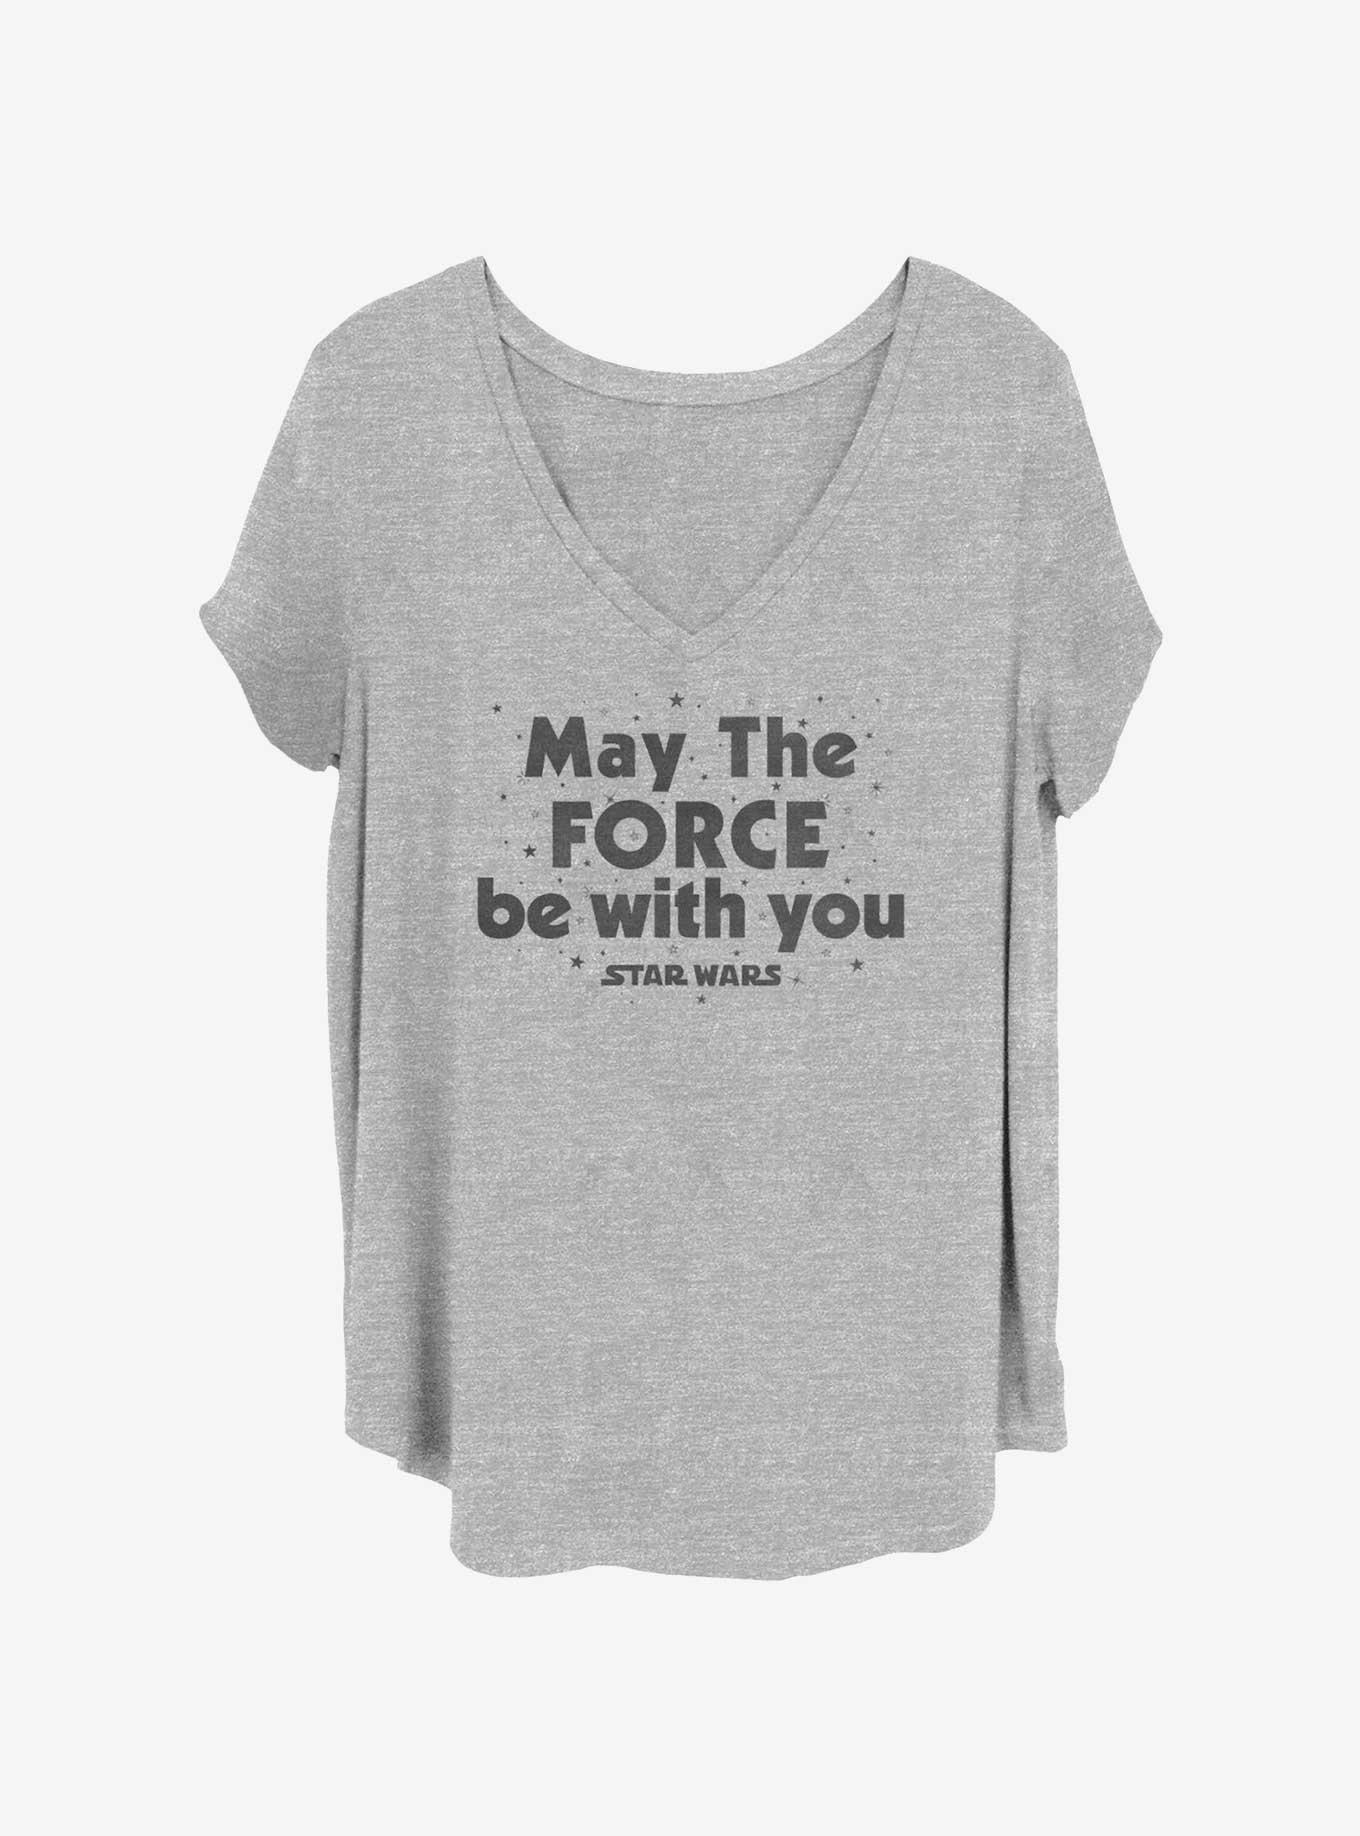 Star Wars May The Force Be With You Girls T-Shirt Plus Size, HEATHER GR, hi-res